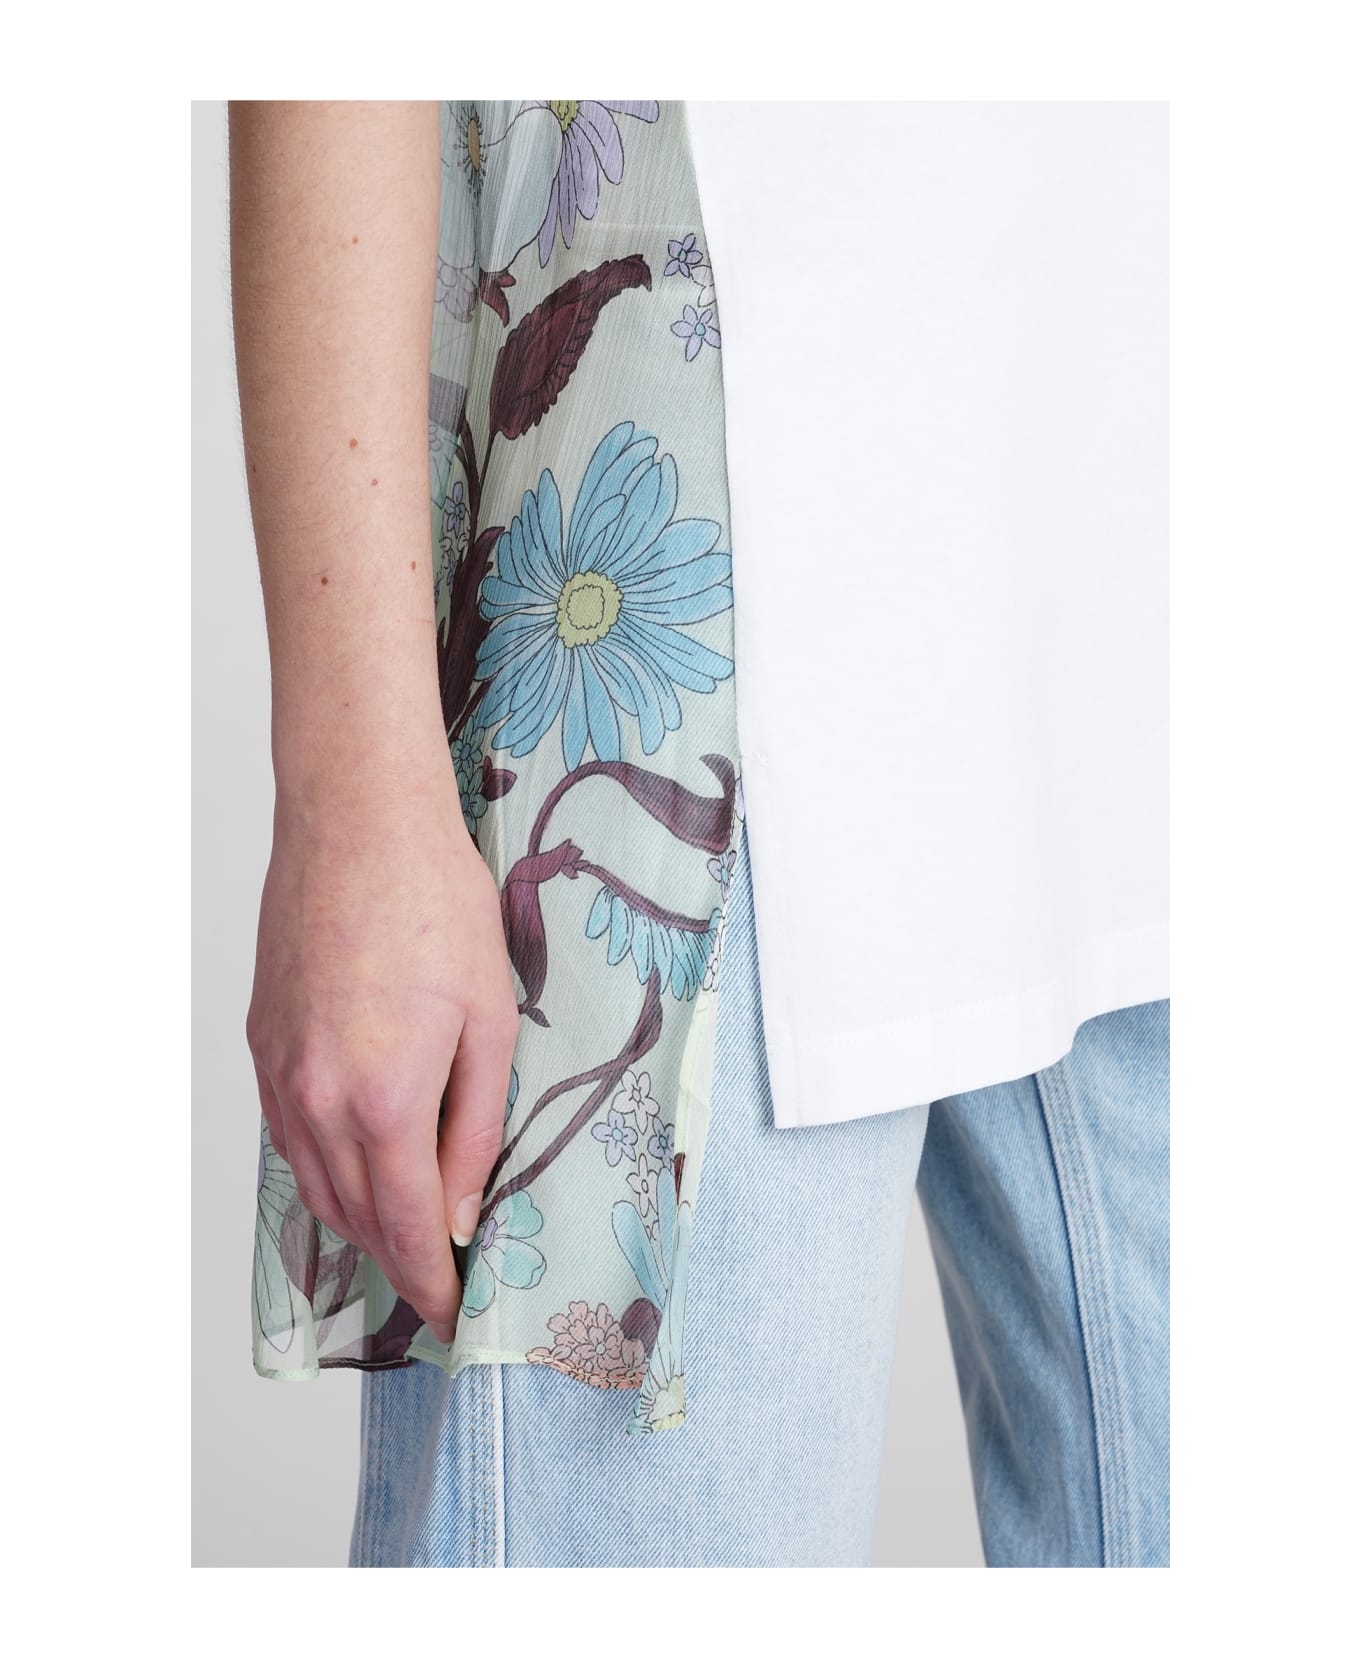 Stella McCartney Floral Printed Panelled T-shirt - white Tシャツ